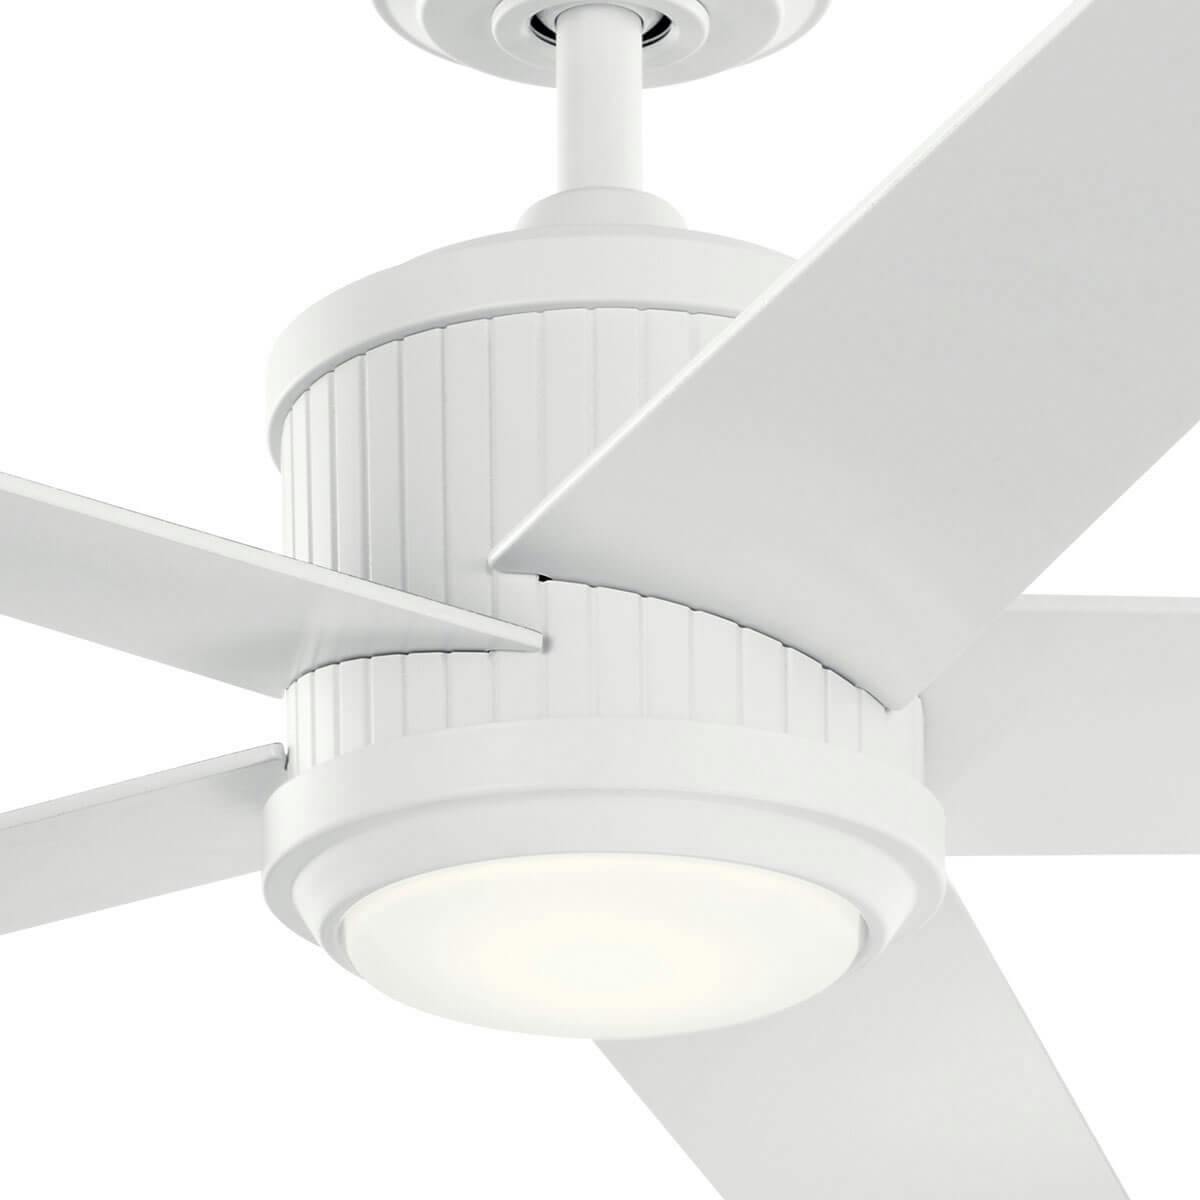 Close up view of the 56” Brahm LED Ceiling Fan in Matte  on a white background